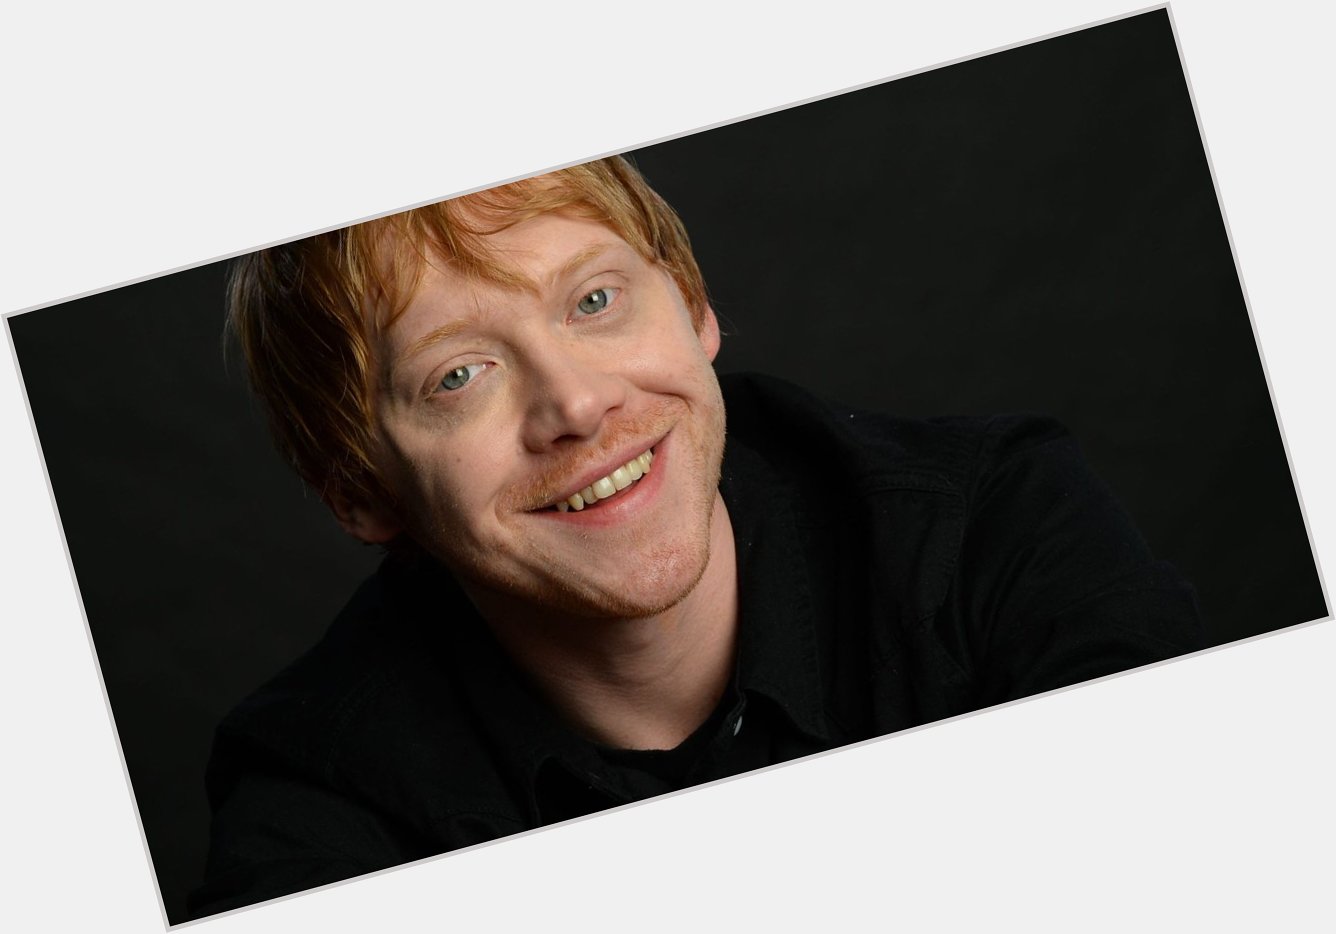 Happy Birthday to our perfect Ron Weasley: Rupert Grint!   